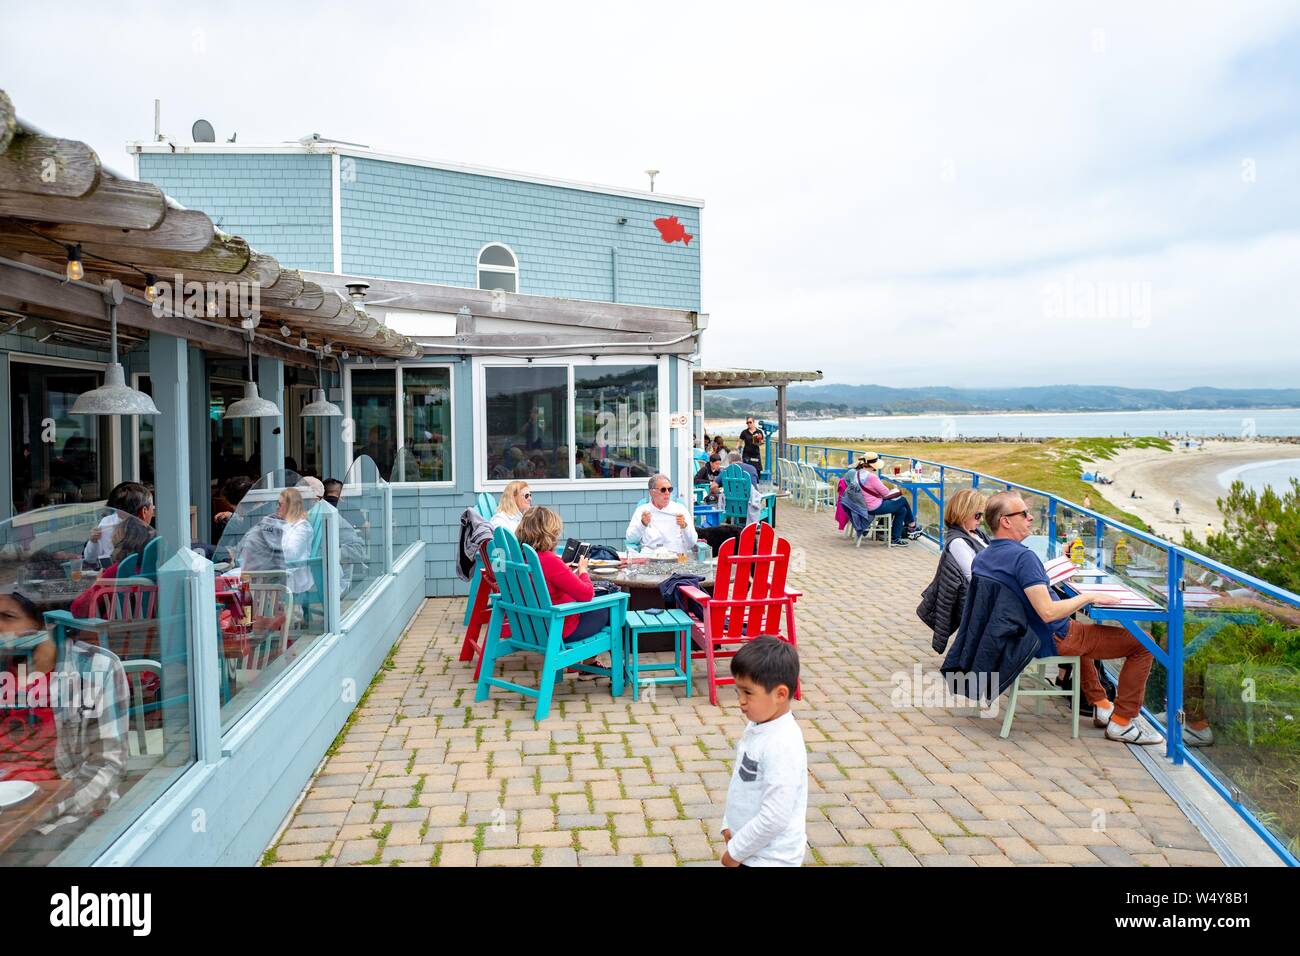 People dine outdoors overlooking the Pacific Ocean at the iconic Sam's Chowder House restaurant in Half Moon Bay, California, June 16, 2019. () Stock Photo